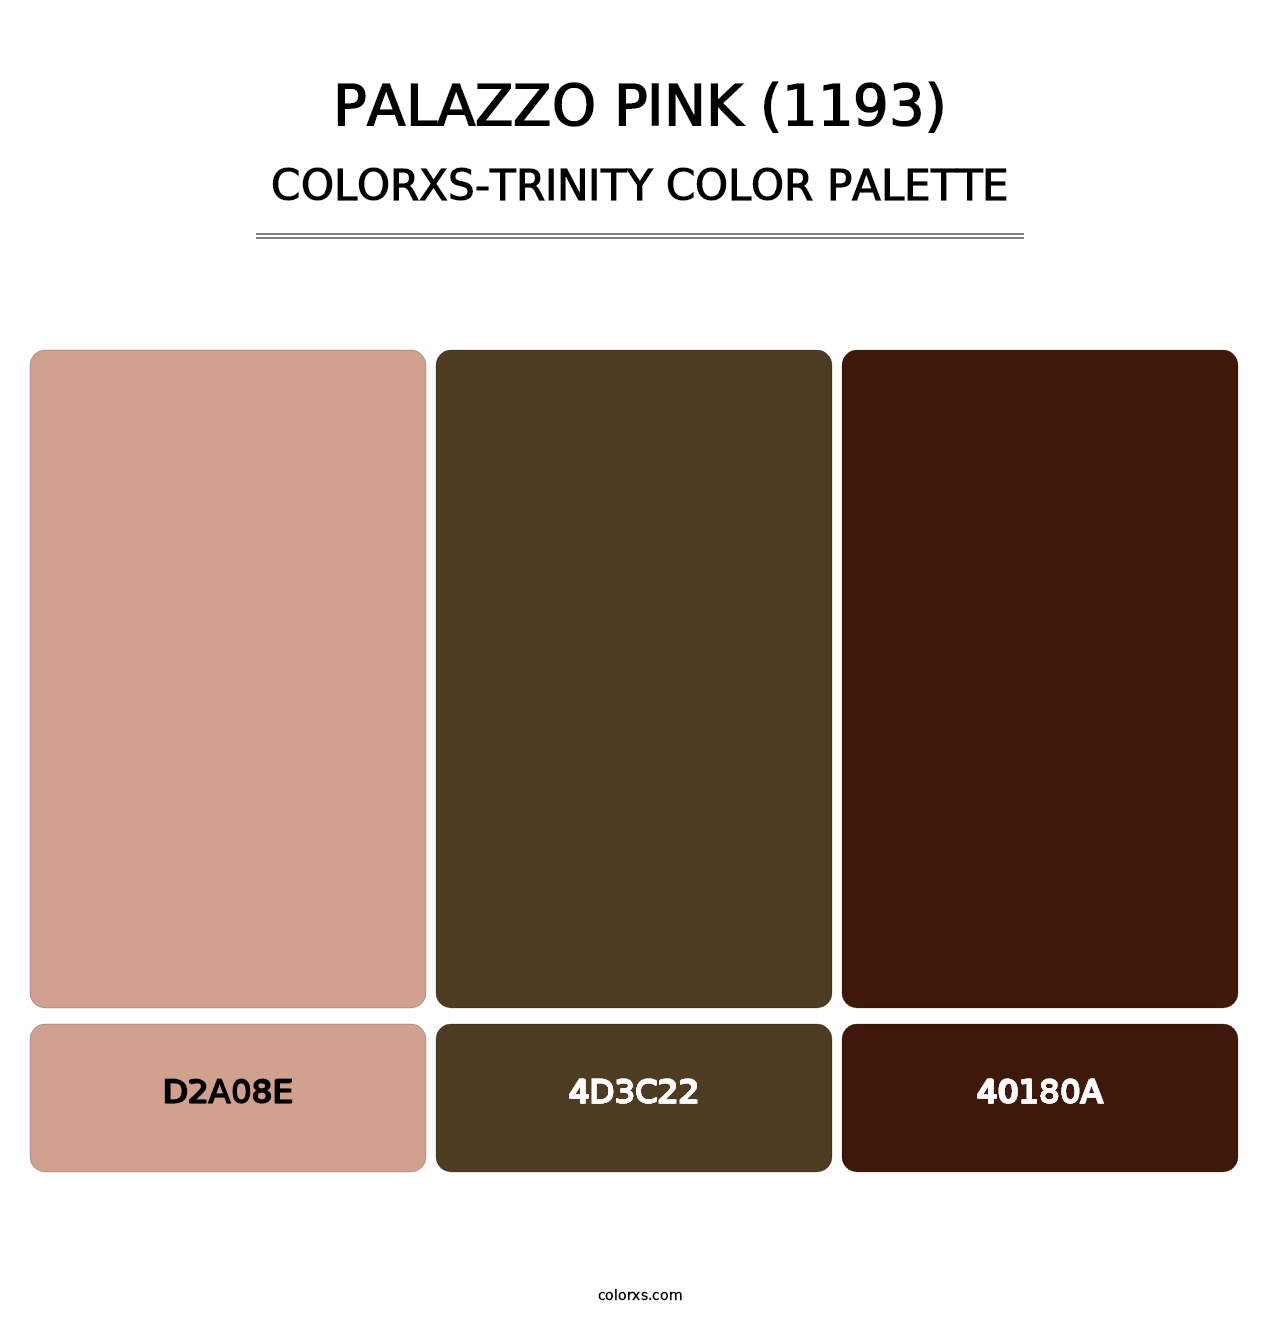 Palazzo Pink (1193) - Colorxs Trinity Palette